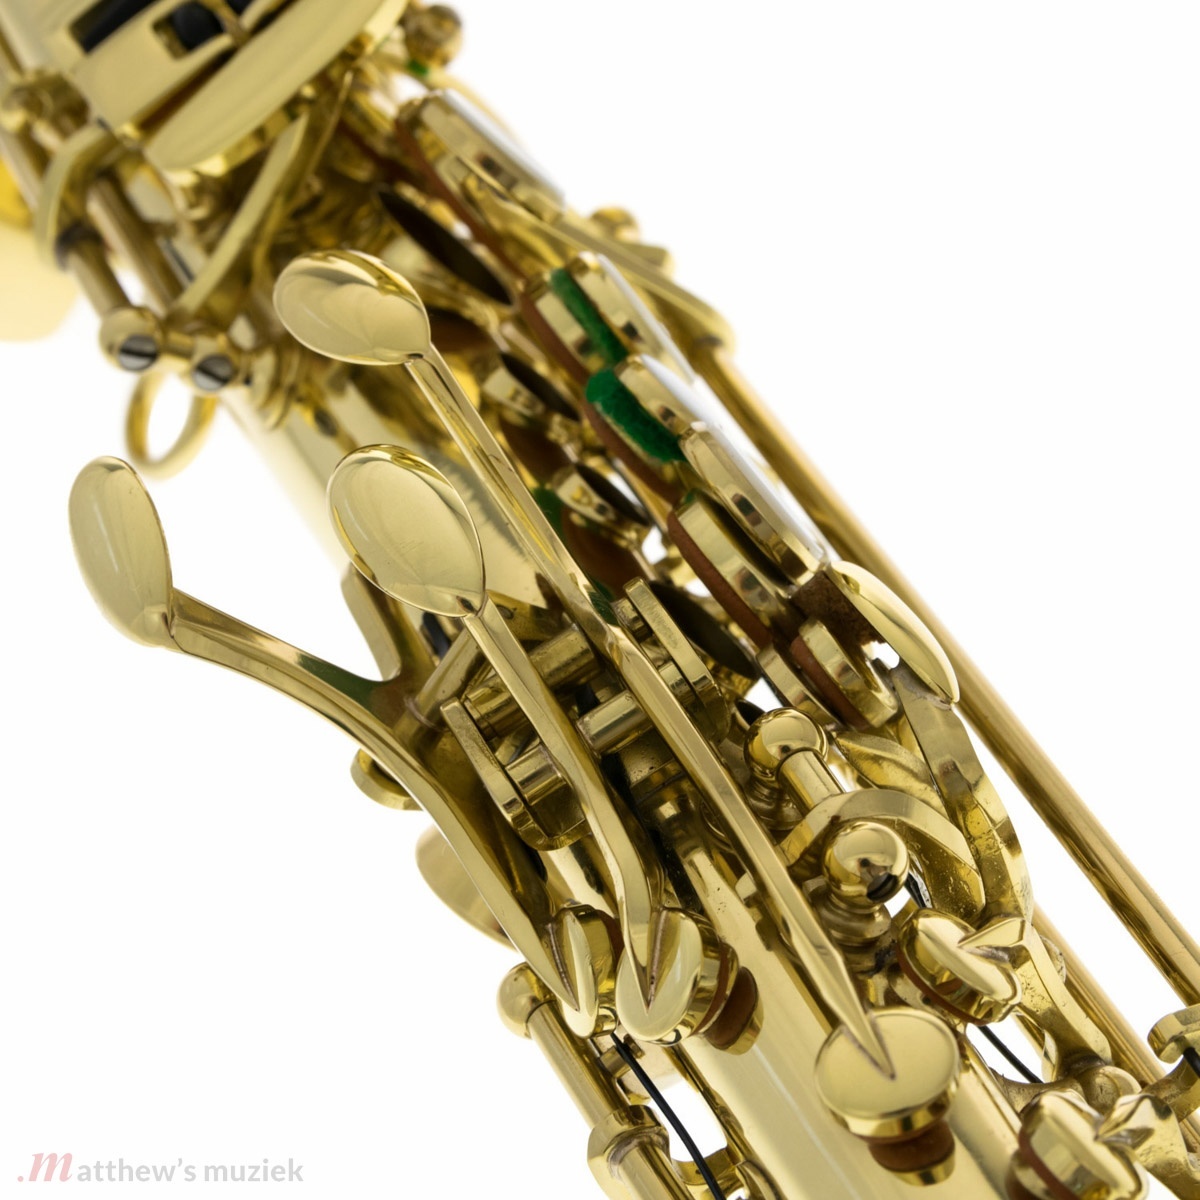 Magenta Winds Curved Soprano Sax - CSS 1